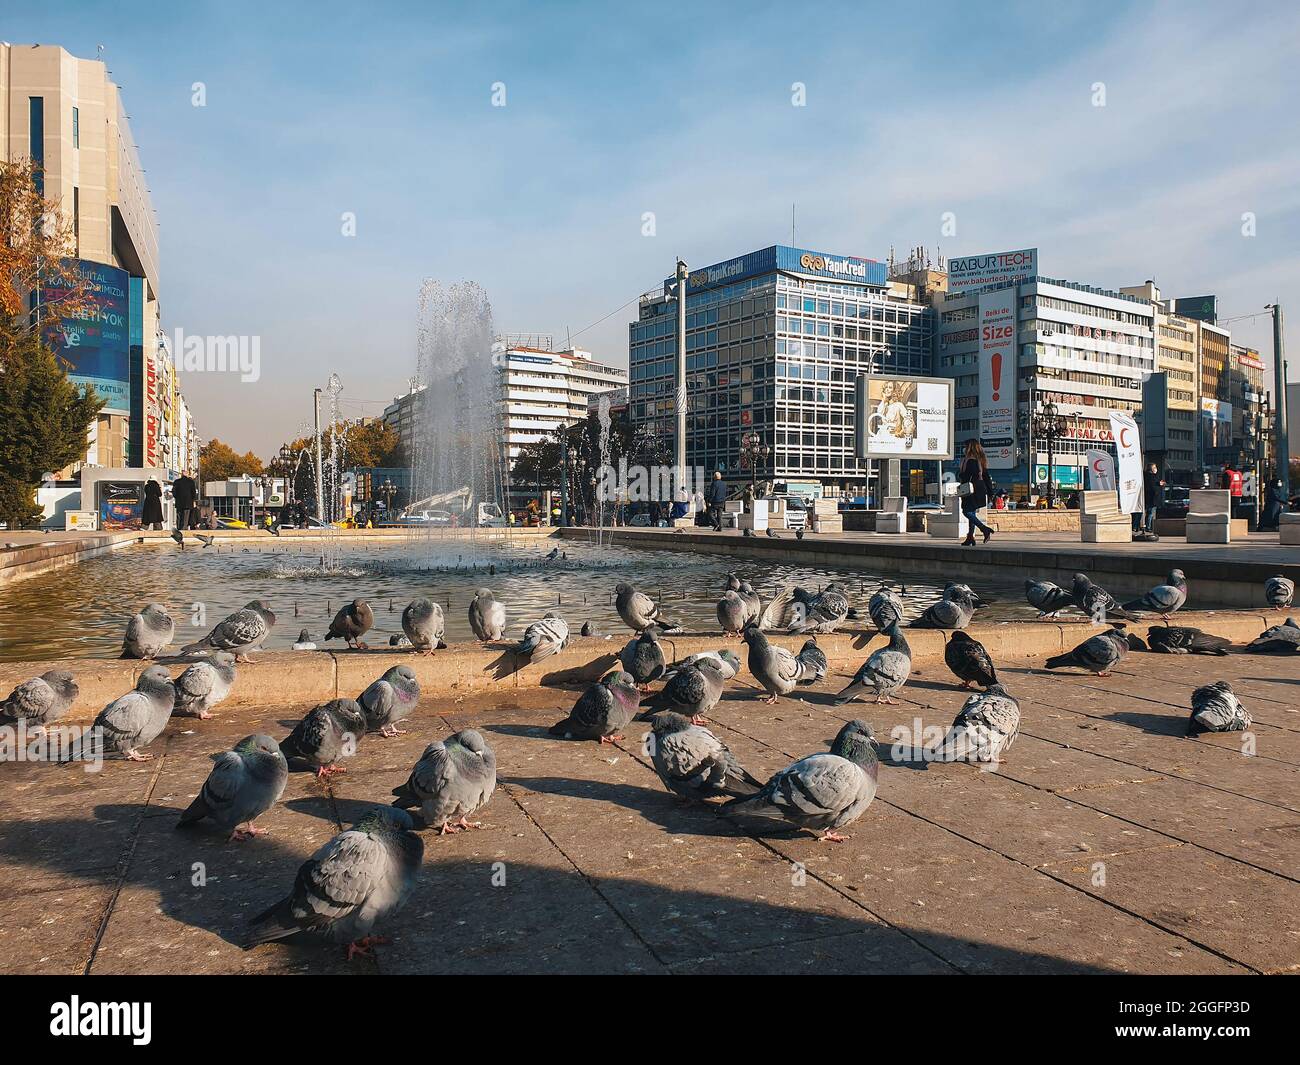 Ankara, Turkey-November 30, 2020: Pigeons warming under sun after bath in Guvenpark, people going to work or doing other activities in Kizilay Square Stock Photo